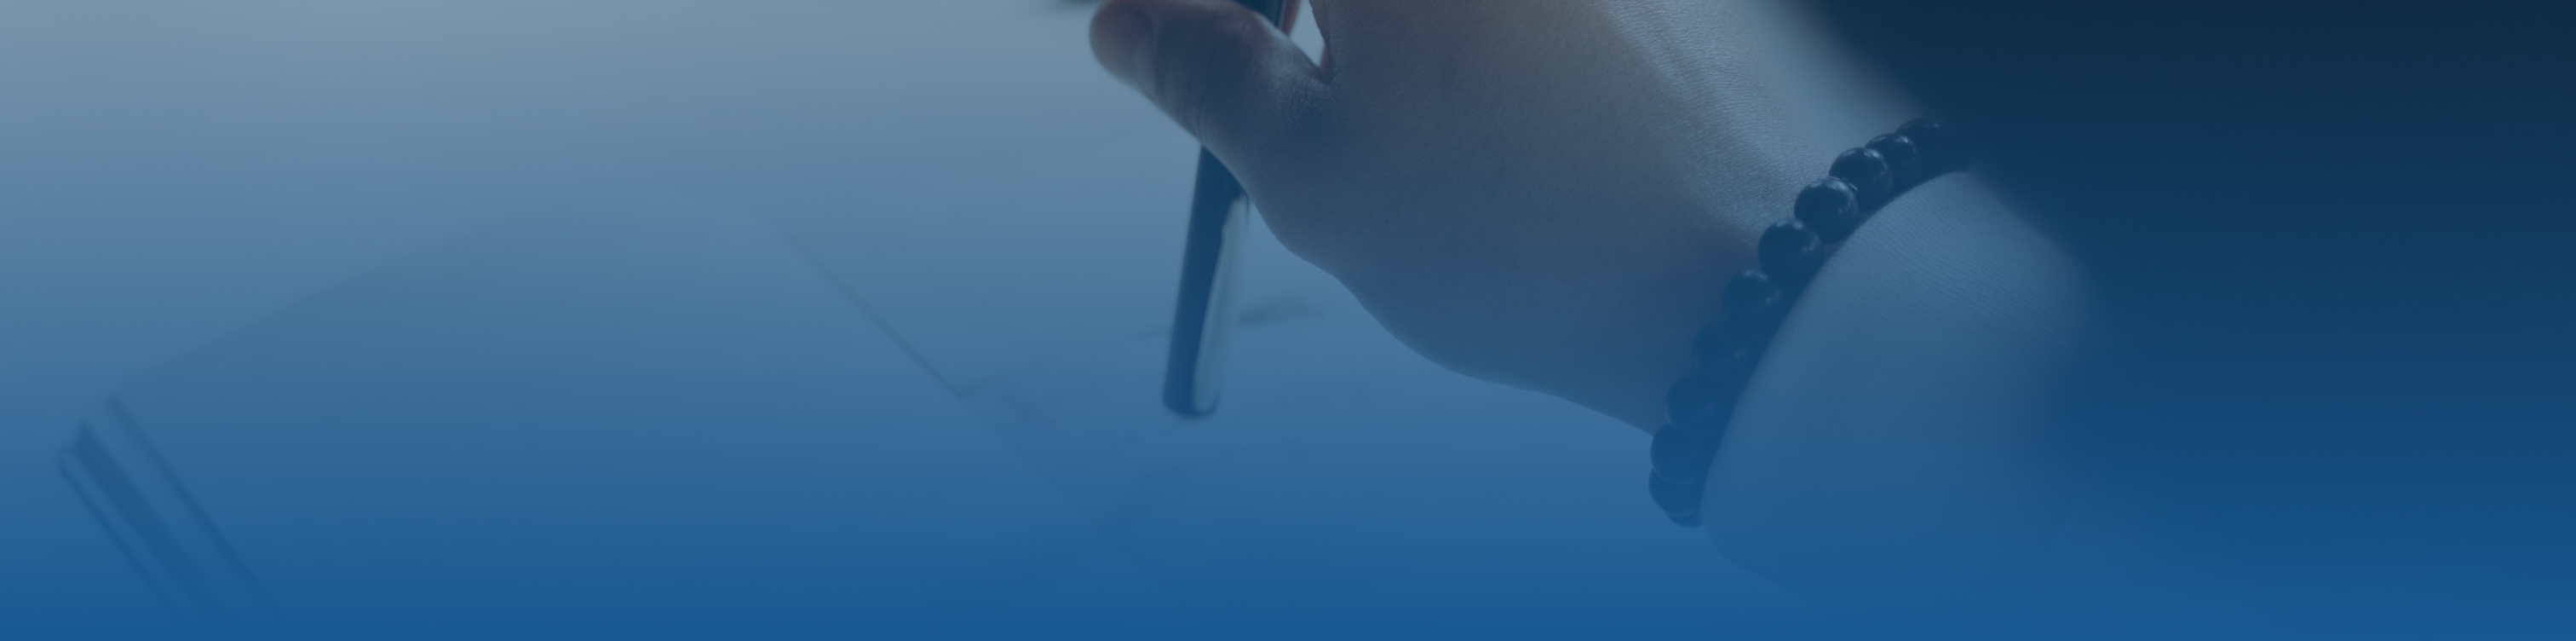 Blue tint frame hero image with a closeup of a persons hand holding a pen over a notebook